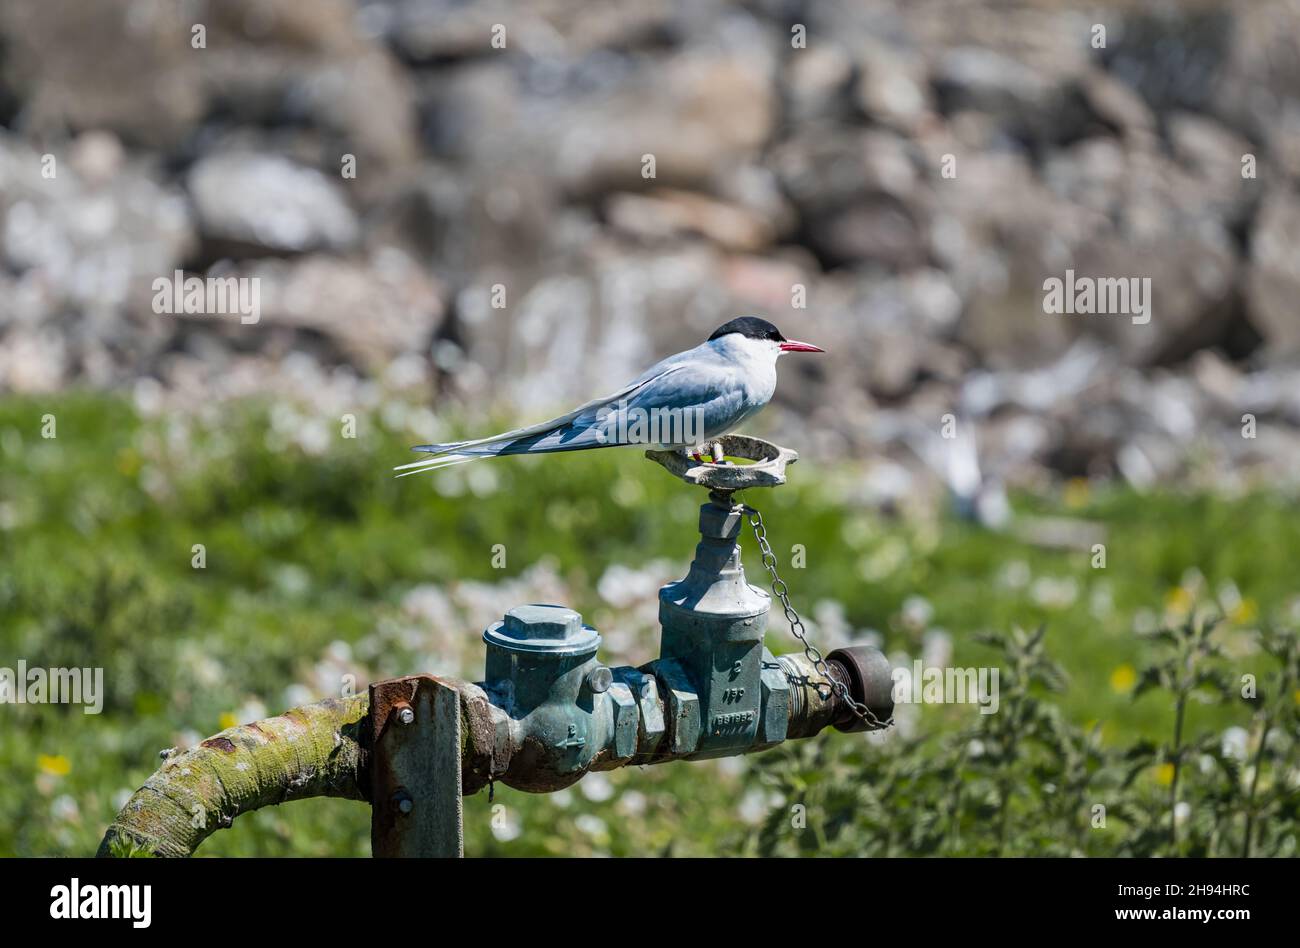 An Arctic tern (Sterna paradisaea) sitting on an old tap in sunshine, Isle of May, Scotland, UK Stock Photo